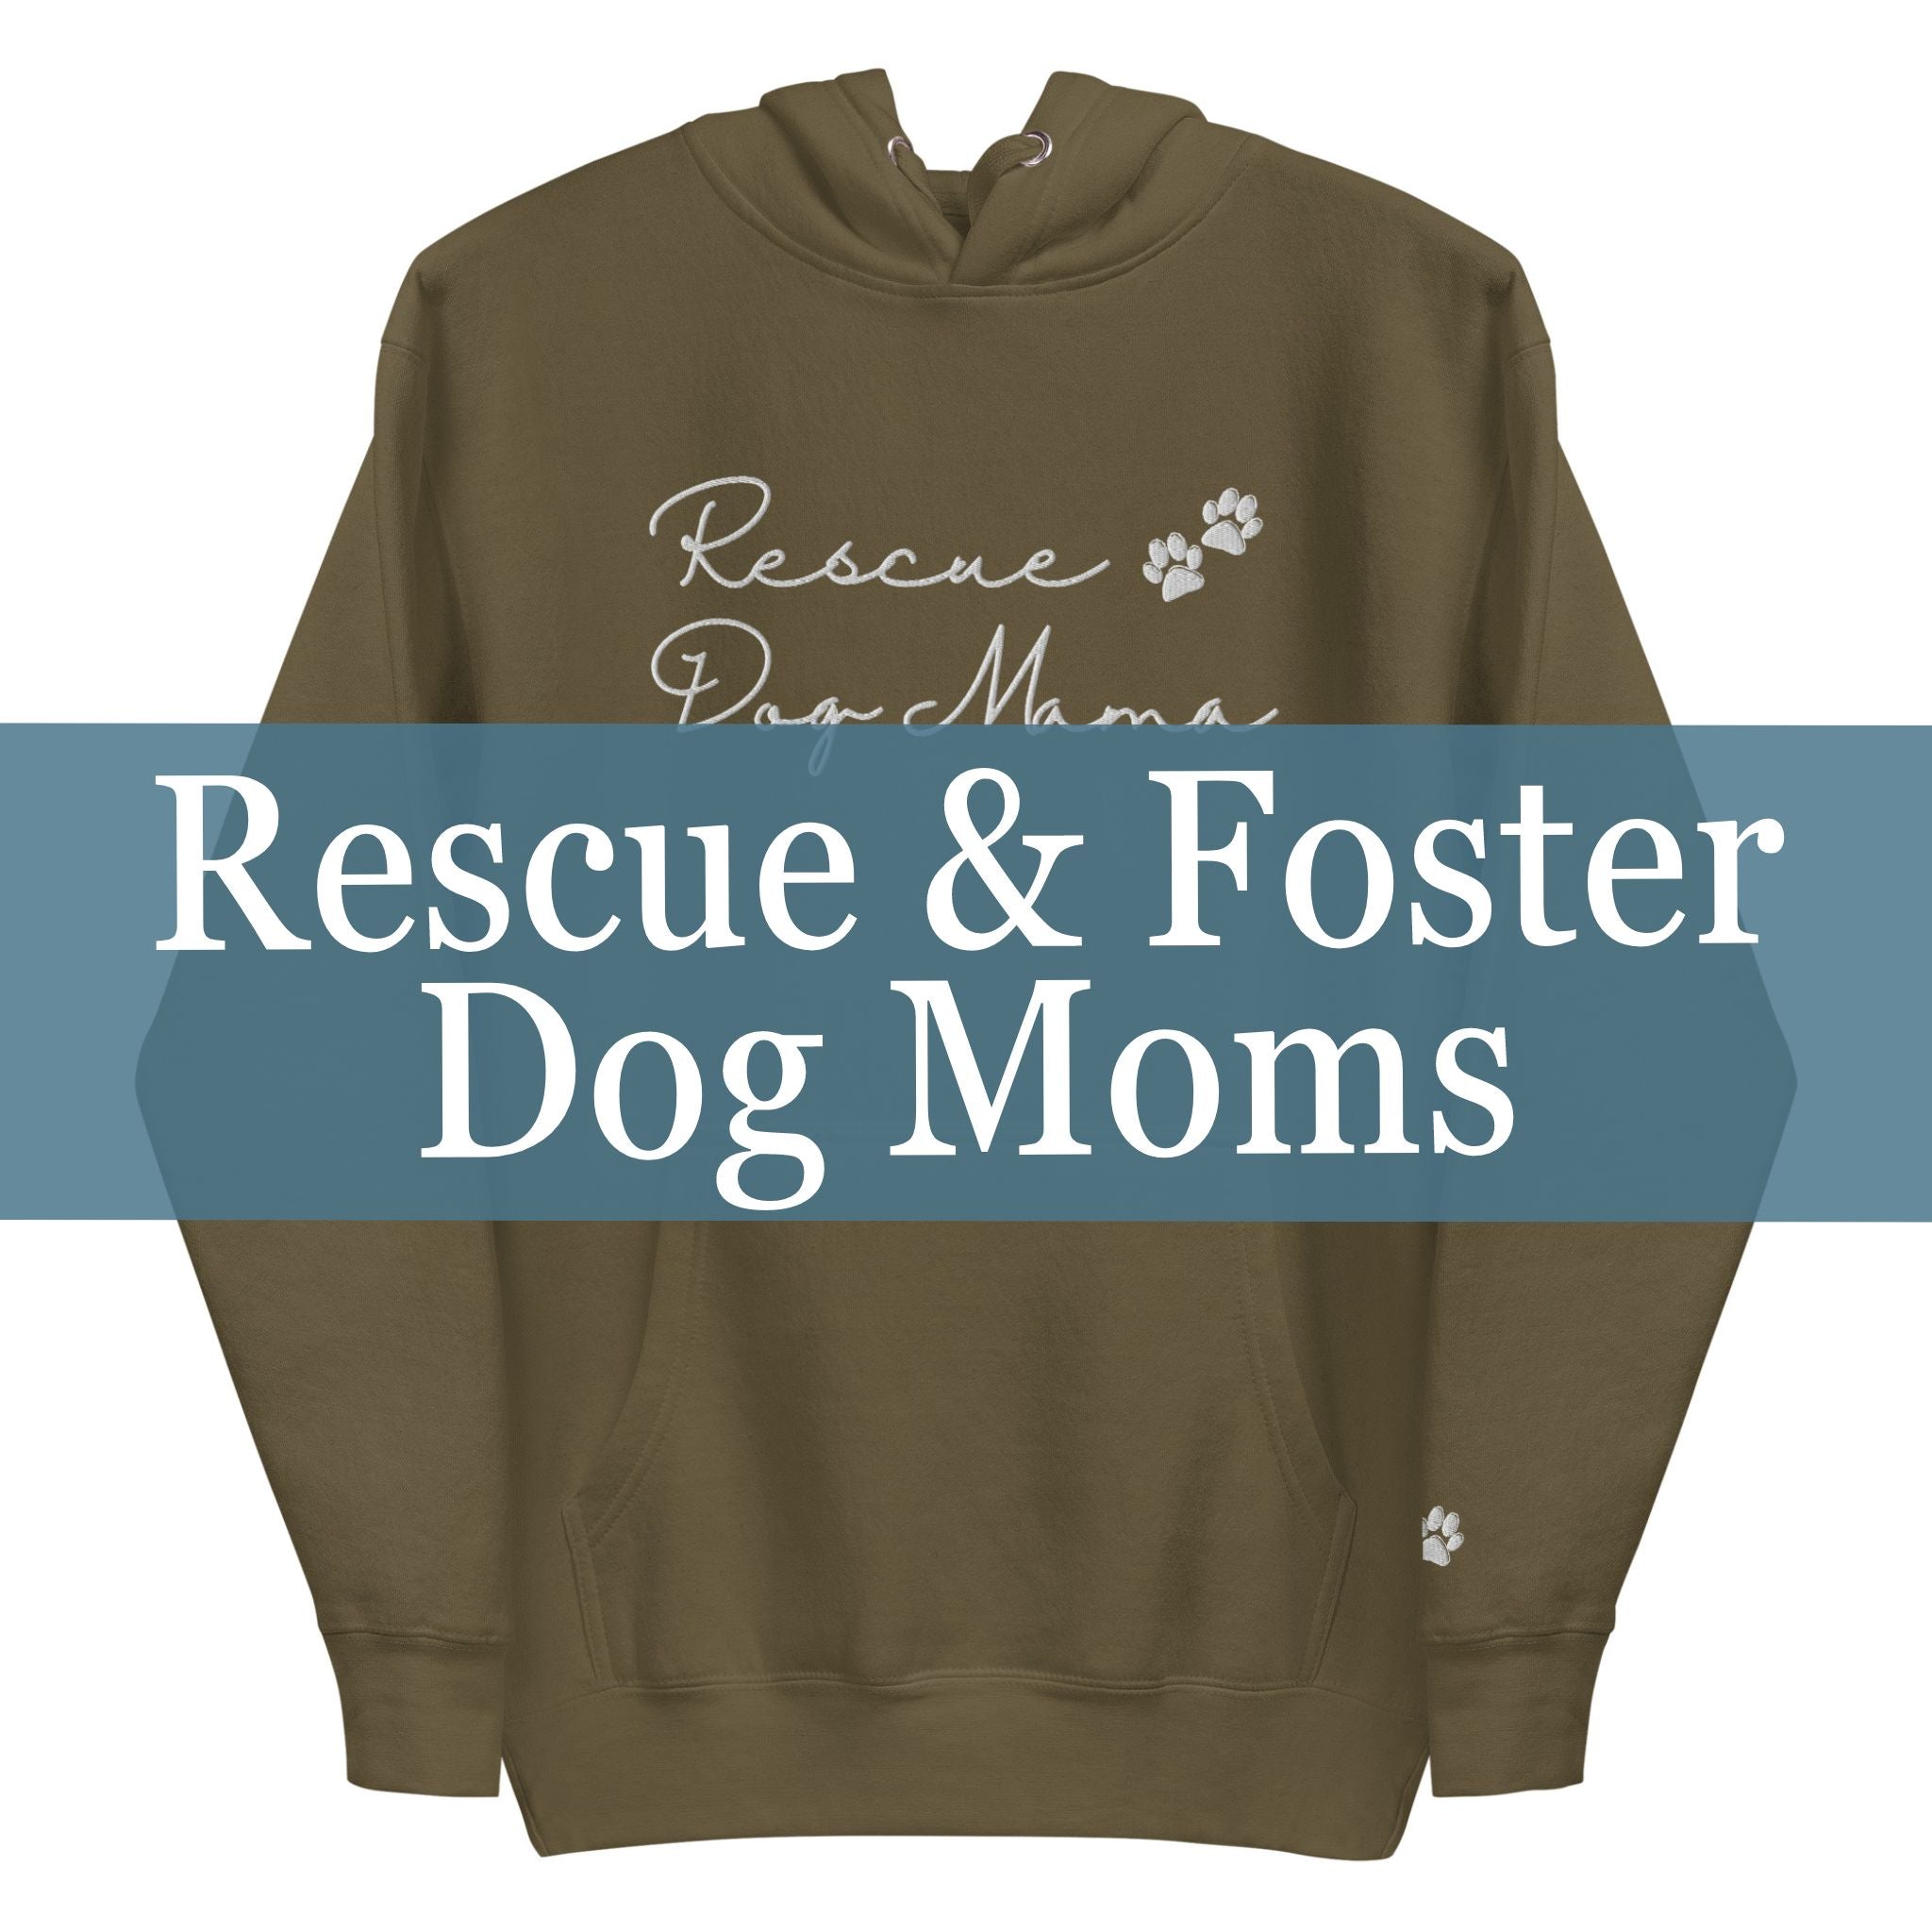 Rescue & Foster Dog Moms